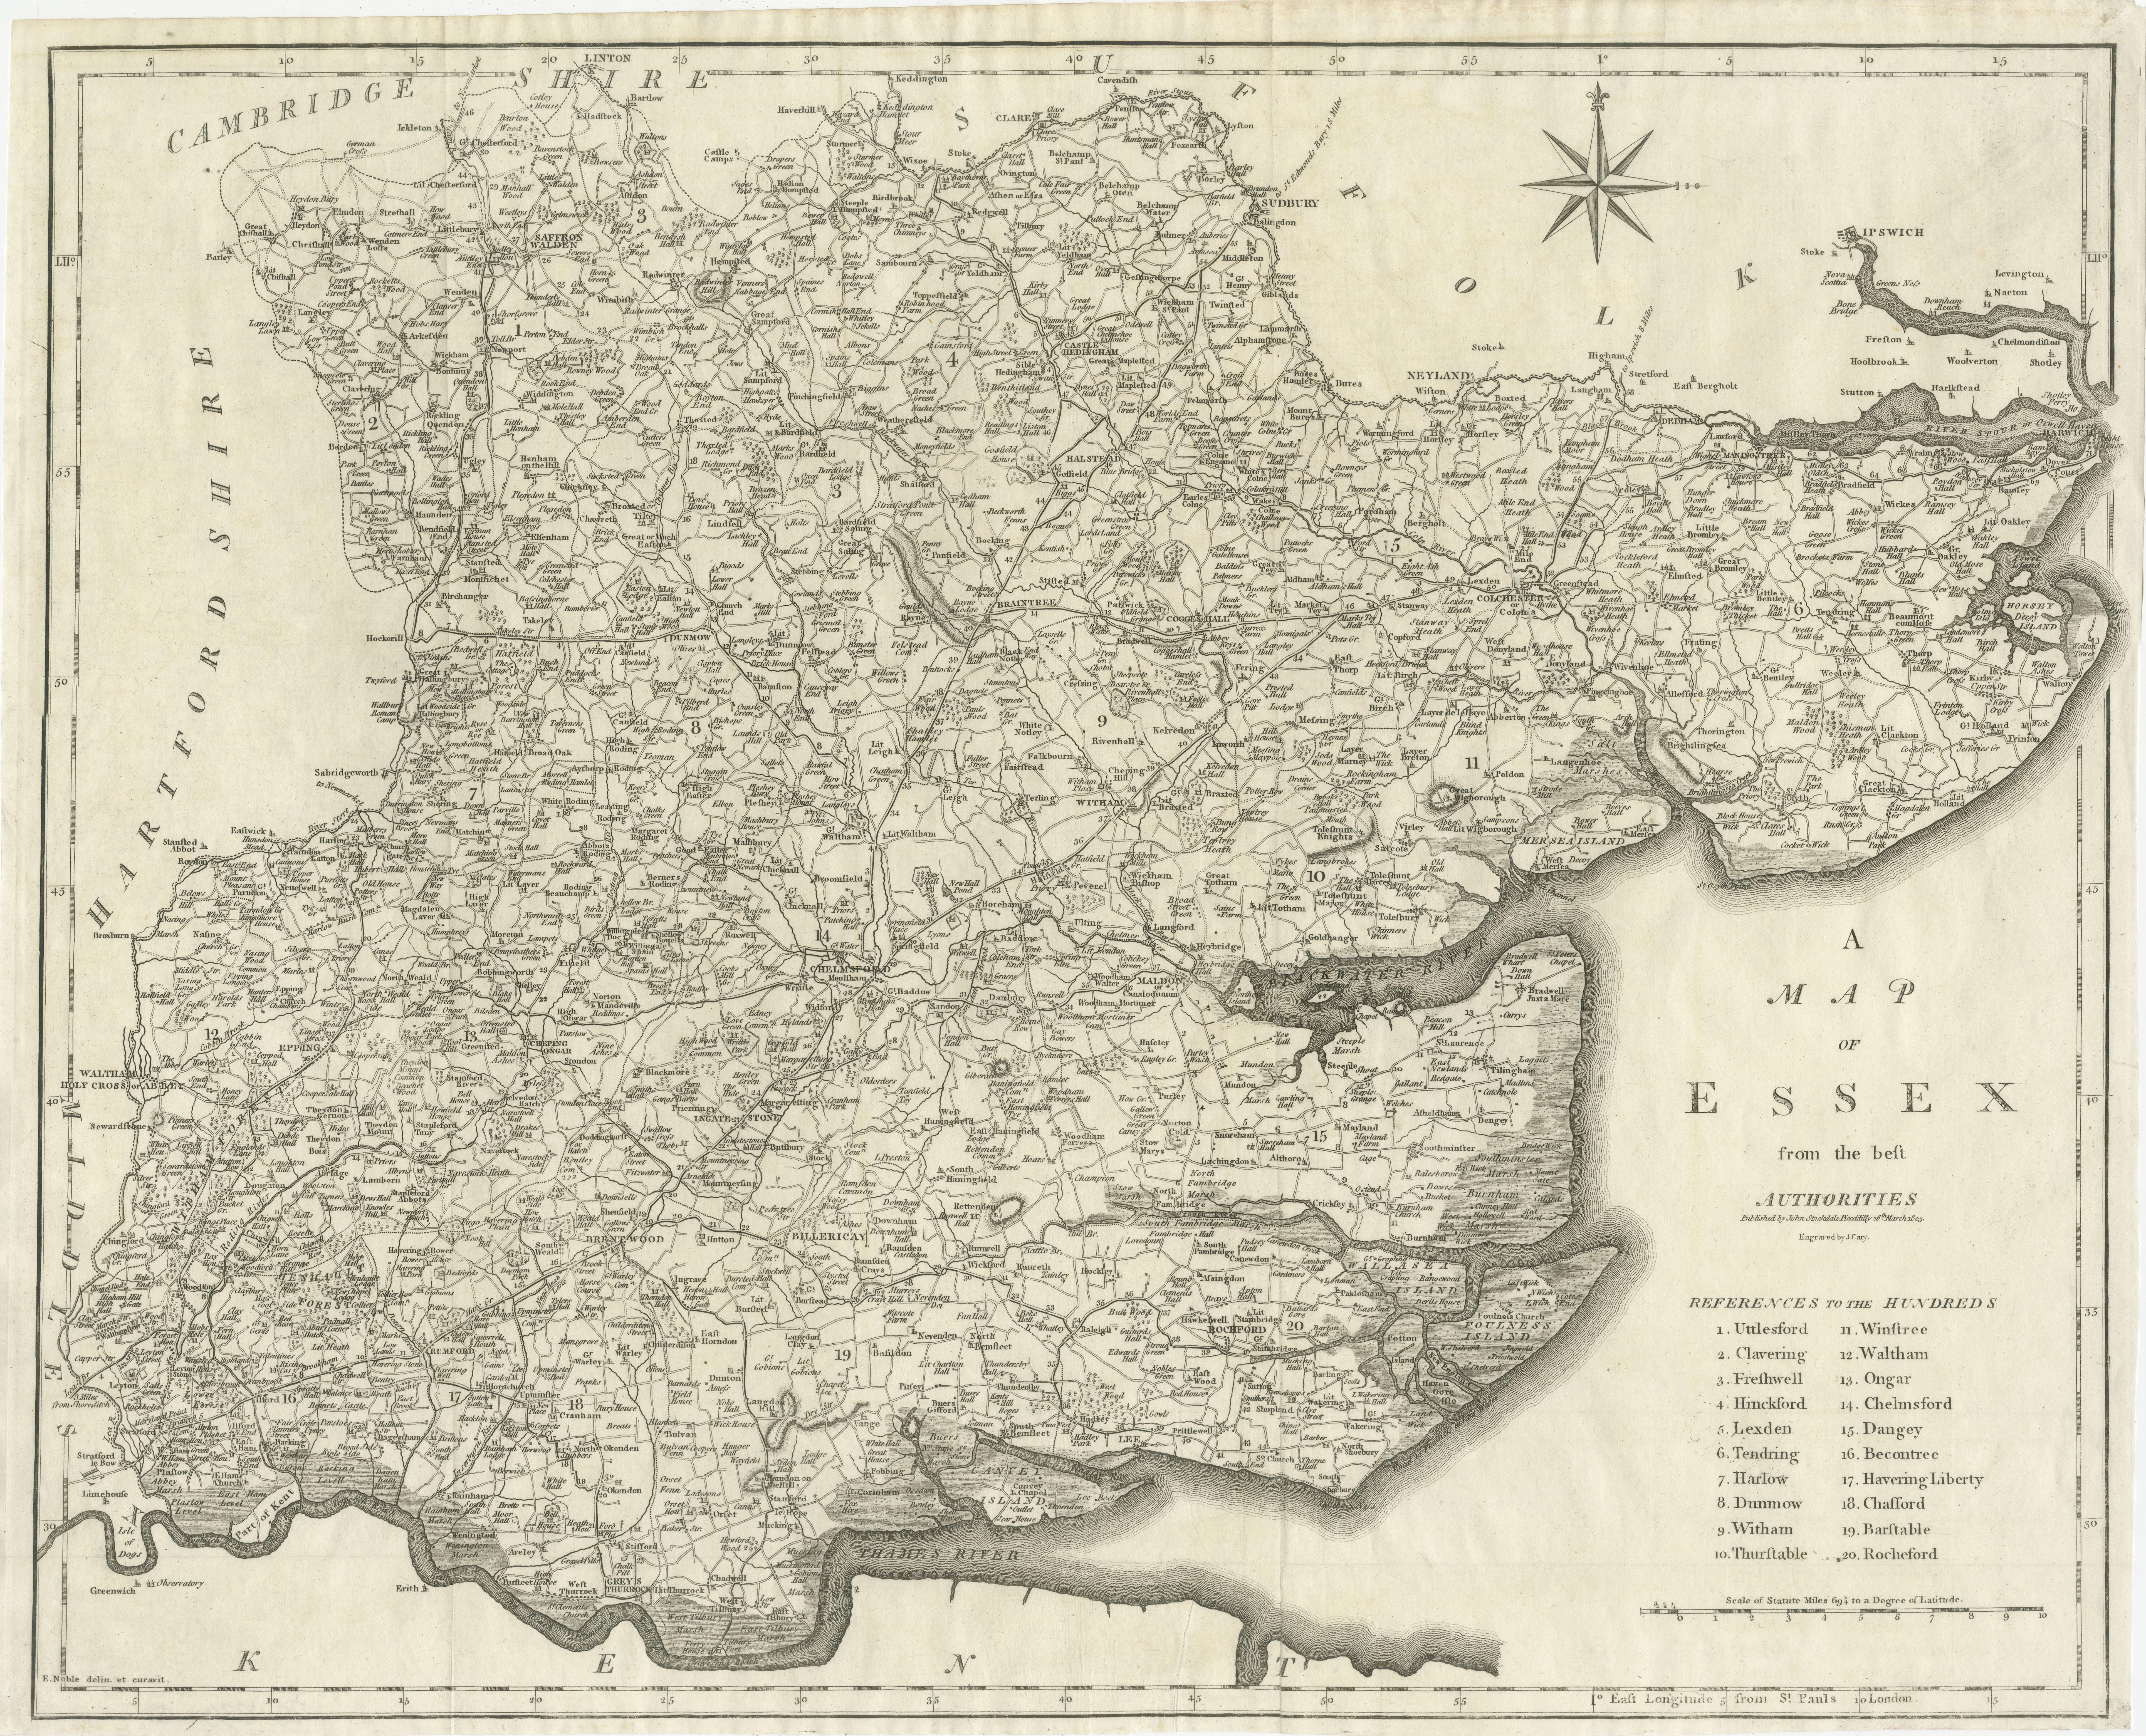 Antique map titled 'A Map of Essex from the best Authorities'. Original old county map of Essex, England. Engraved by John Cary. Originates from 'New British Atlas' by John Stockdale, published 1805. 

John Cary (1755-1835) was a British